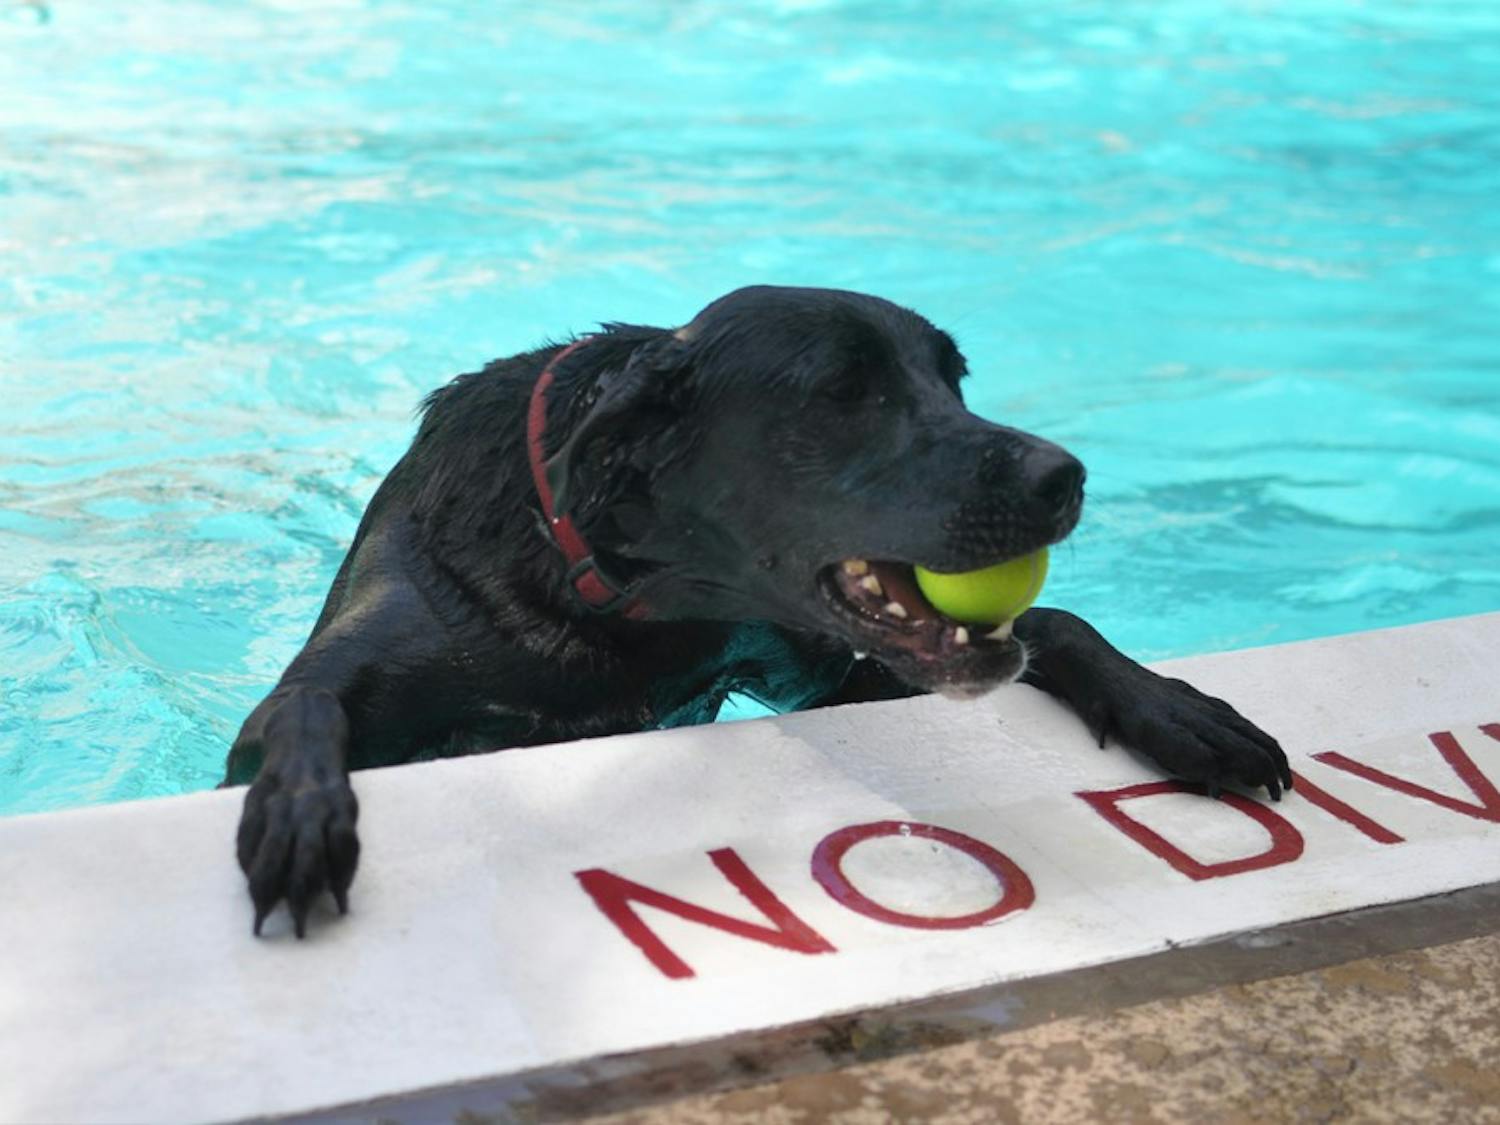 The Hargraves Community Center on Roberson Street hosted the annual Orange County Animal Services Dog Swim Sunday afternoon. This is the event's 11th year.